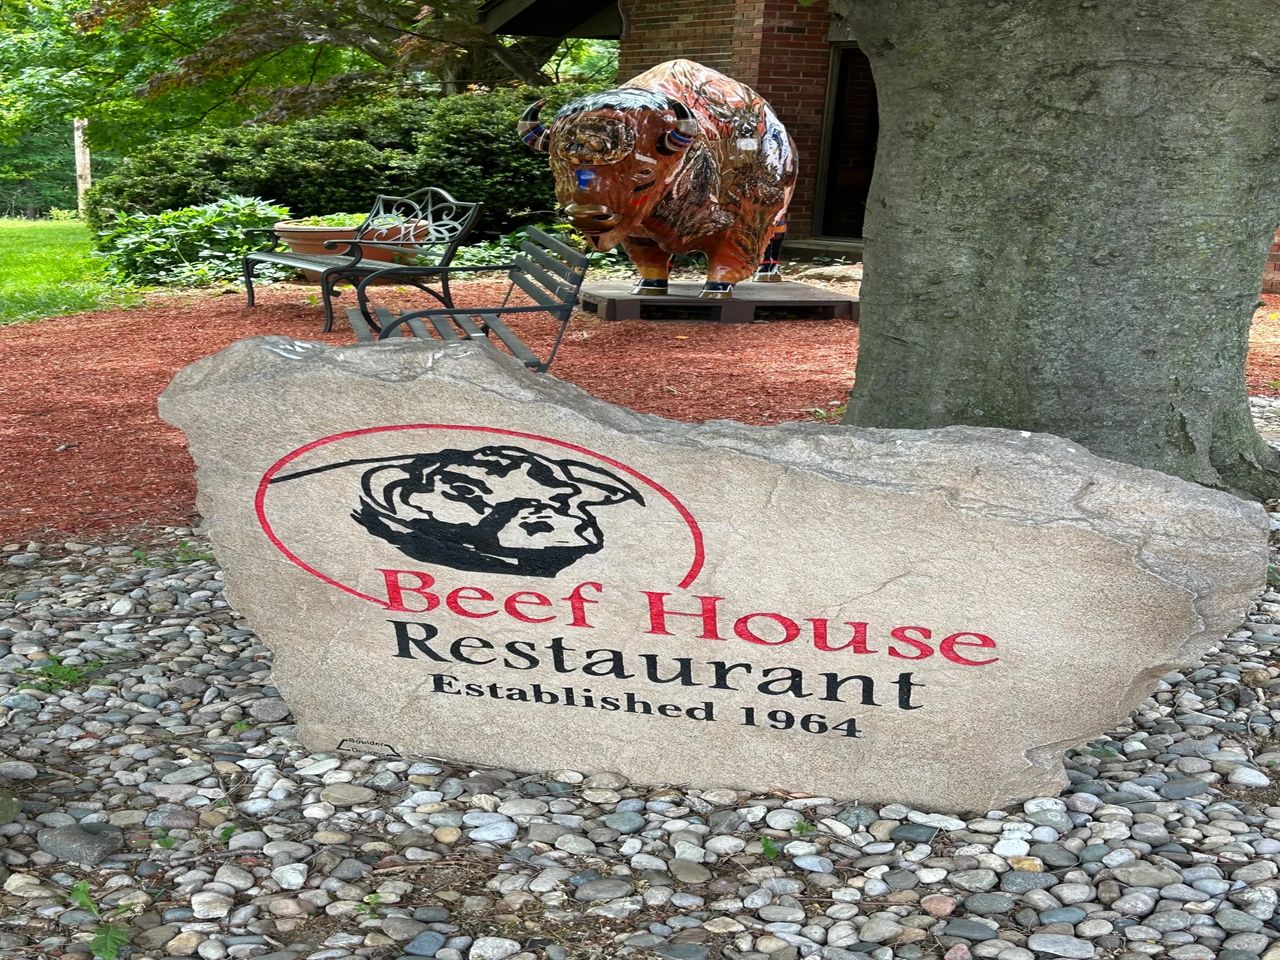 Sign of Beef House Restaurant with large buffalo cow in the background